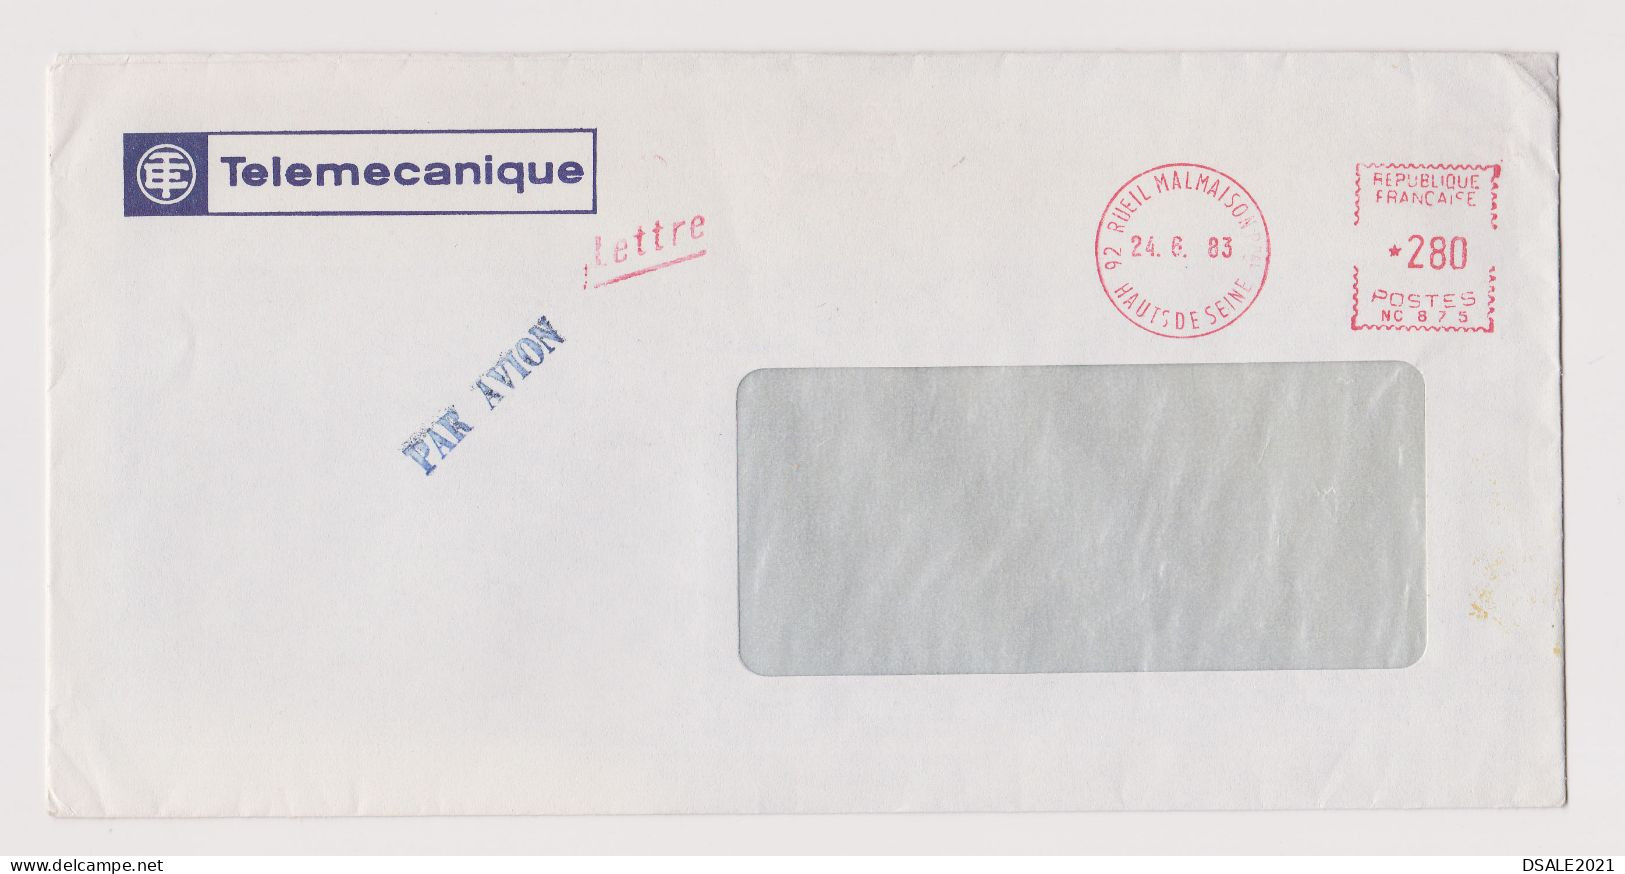 France 1983 Airmail Window Cover With Advertising Machine EMA METER Stamp Cachet, Sent Abroad (66856) - Briefe U. Dokumente